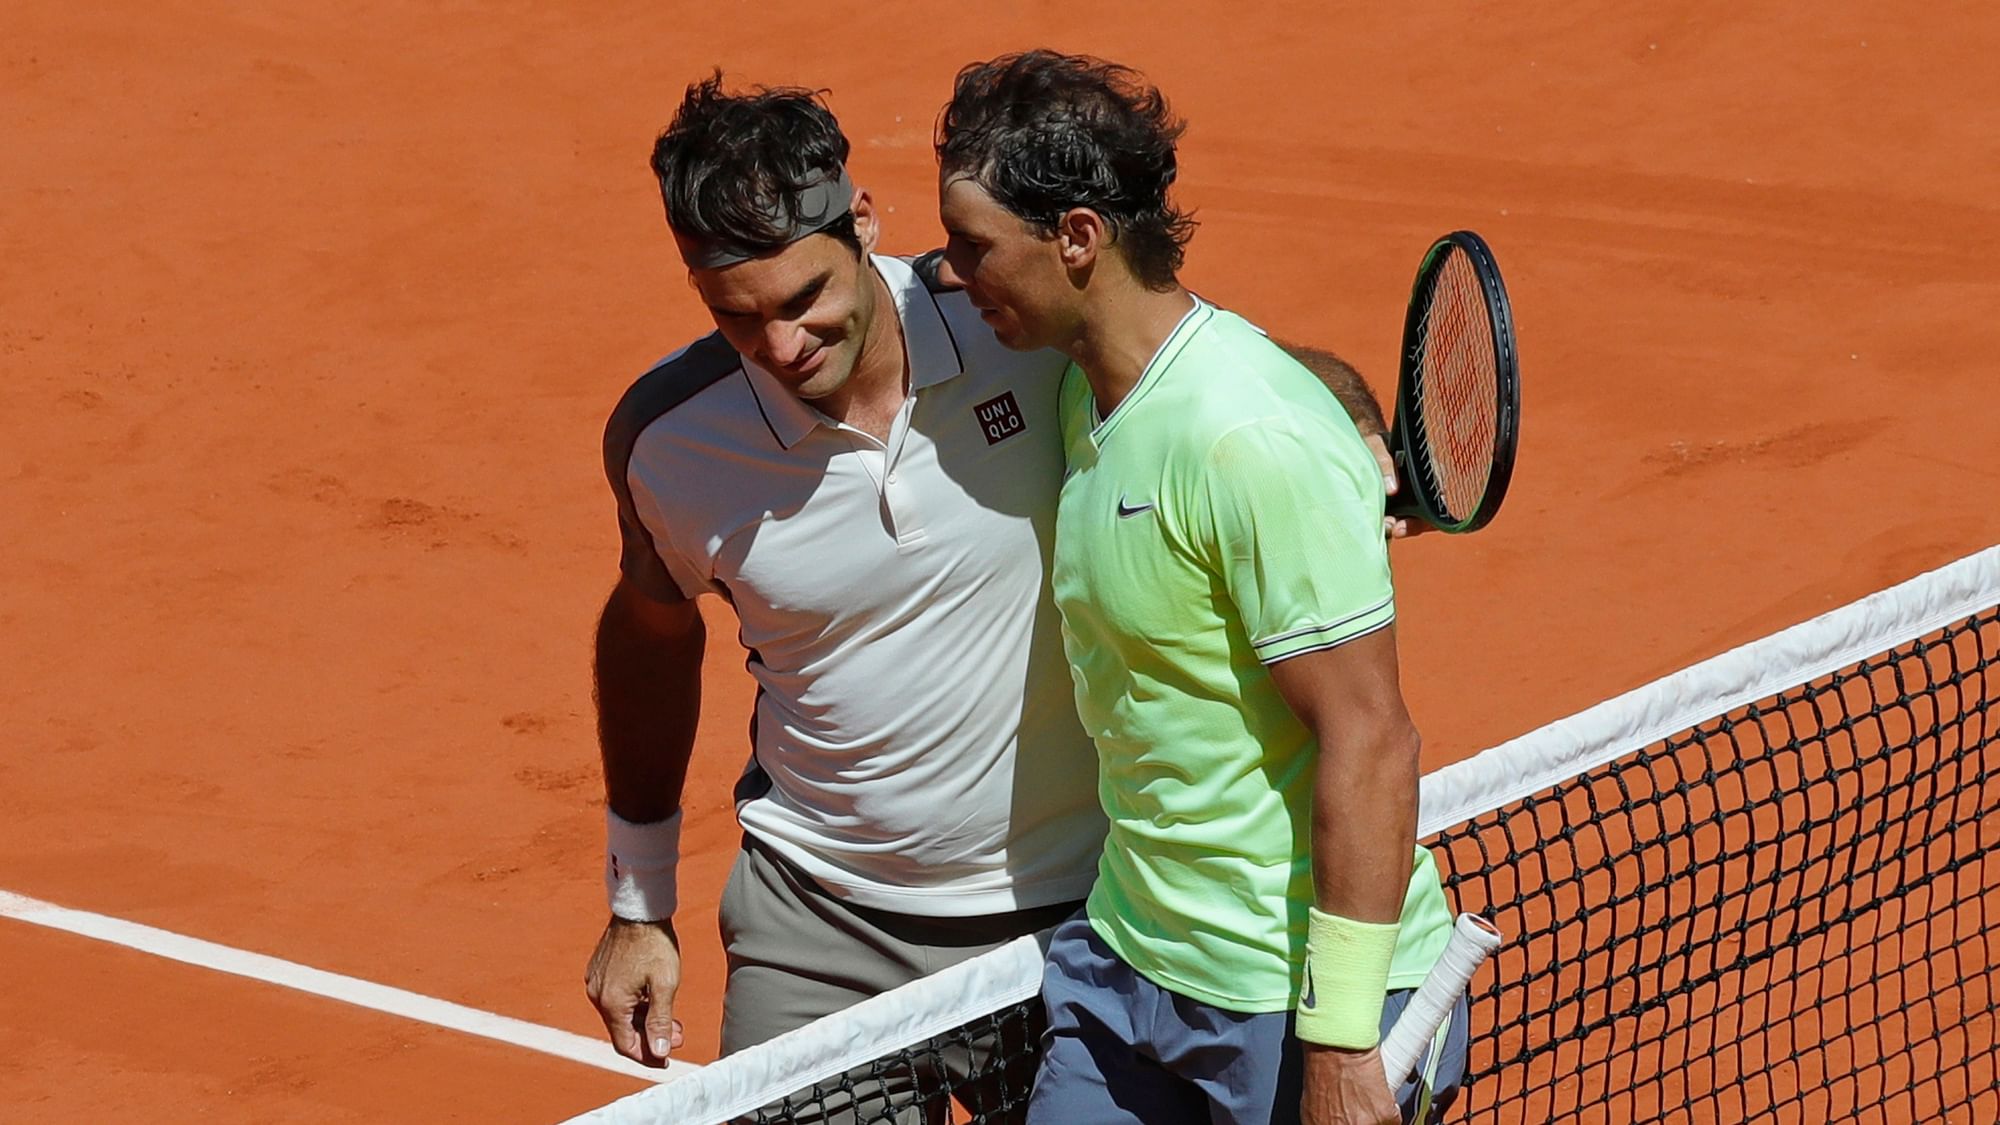 Nadal made quick work of Federer in their first meeting at Roland Garros since 2011.